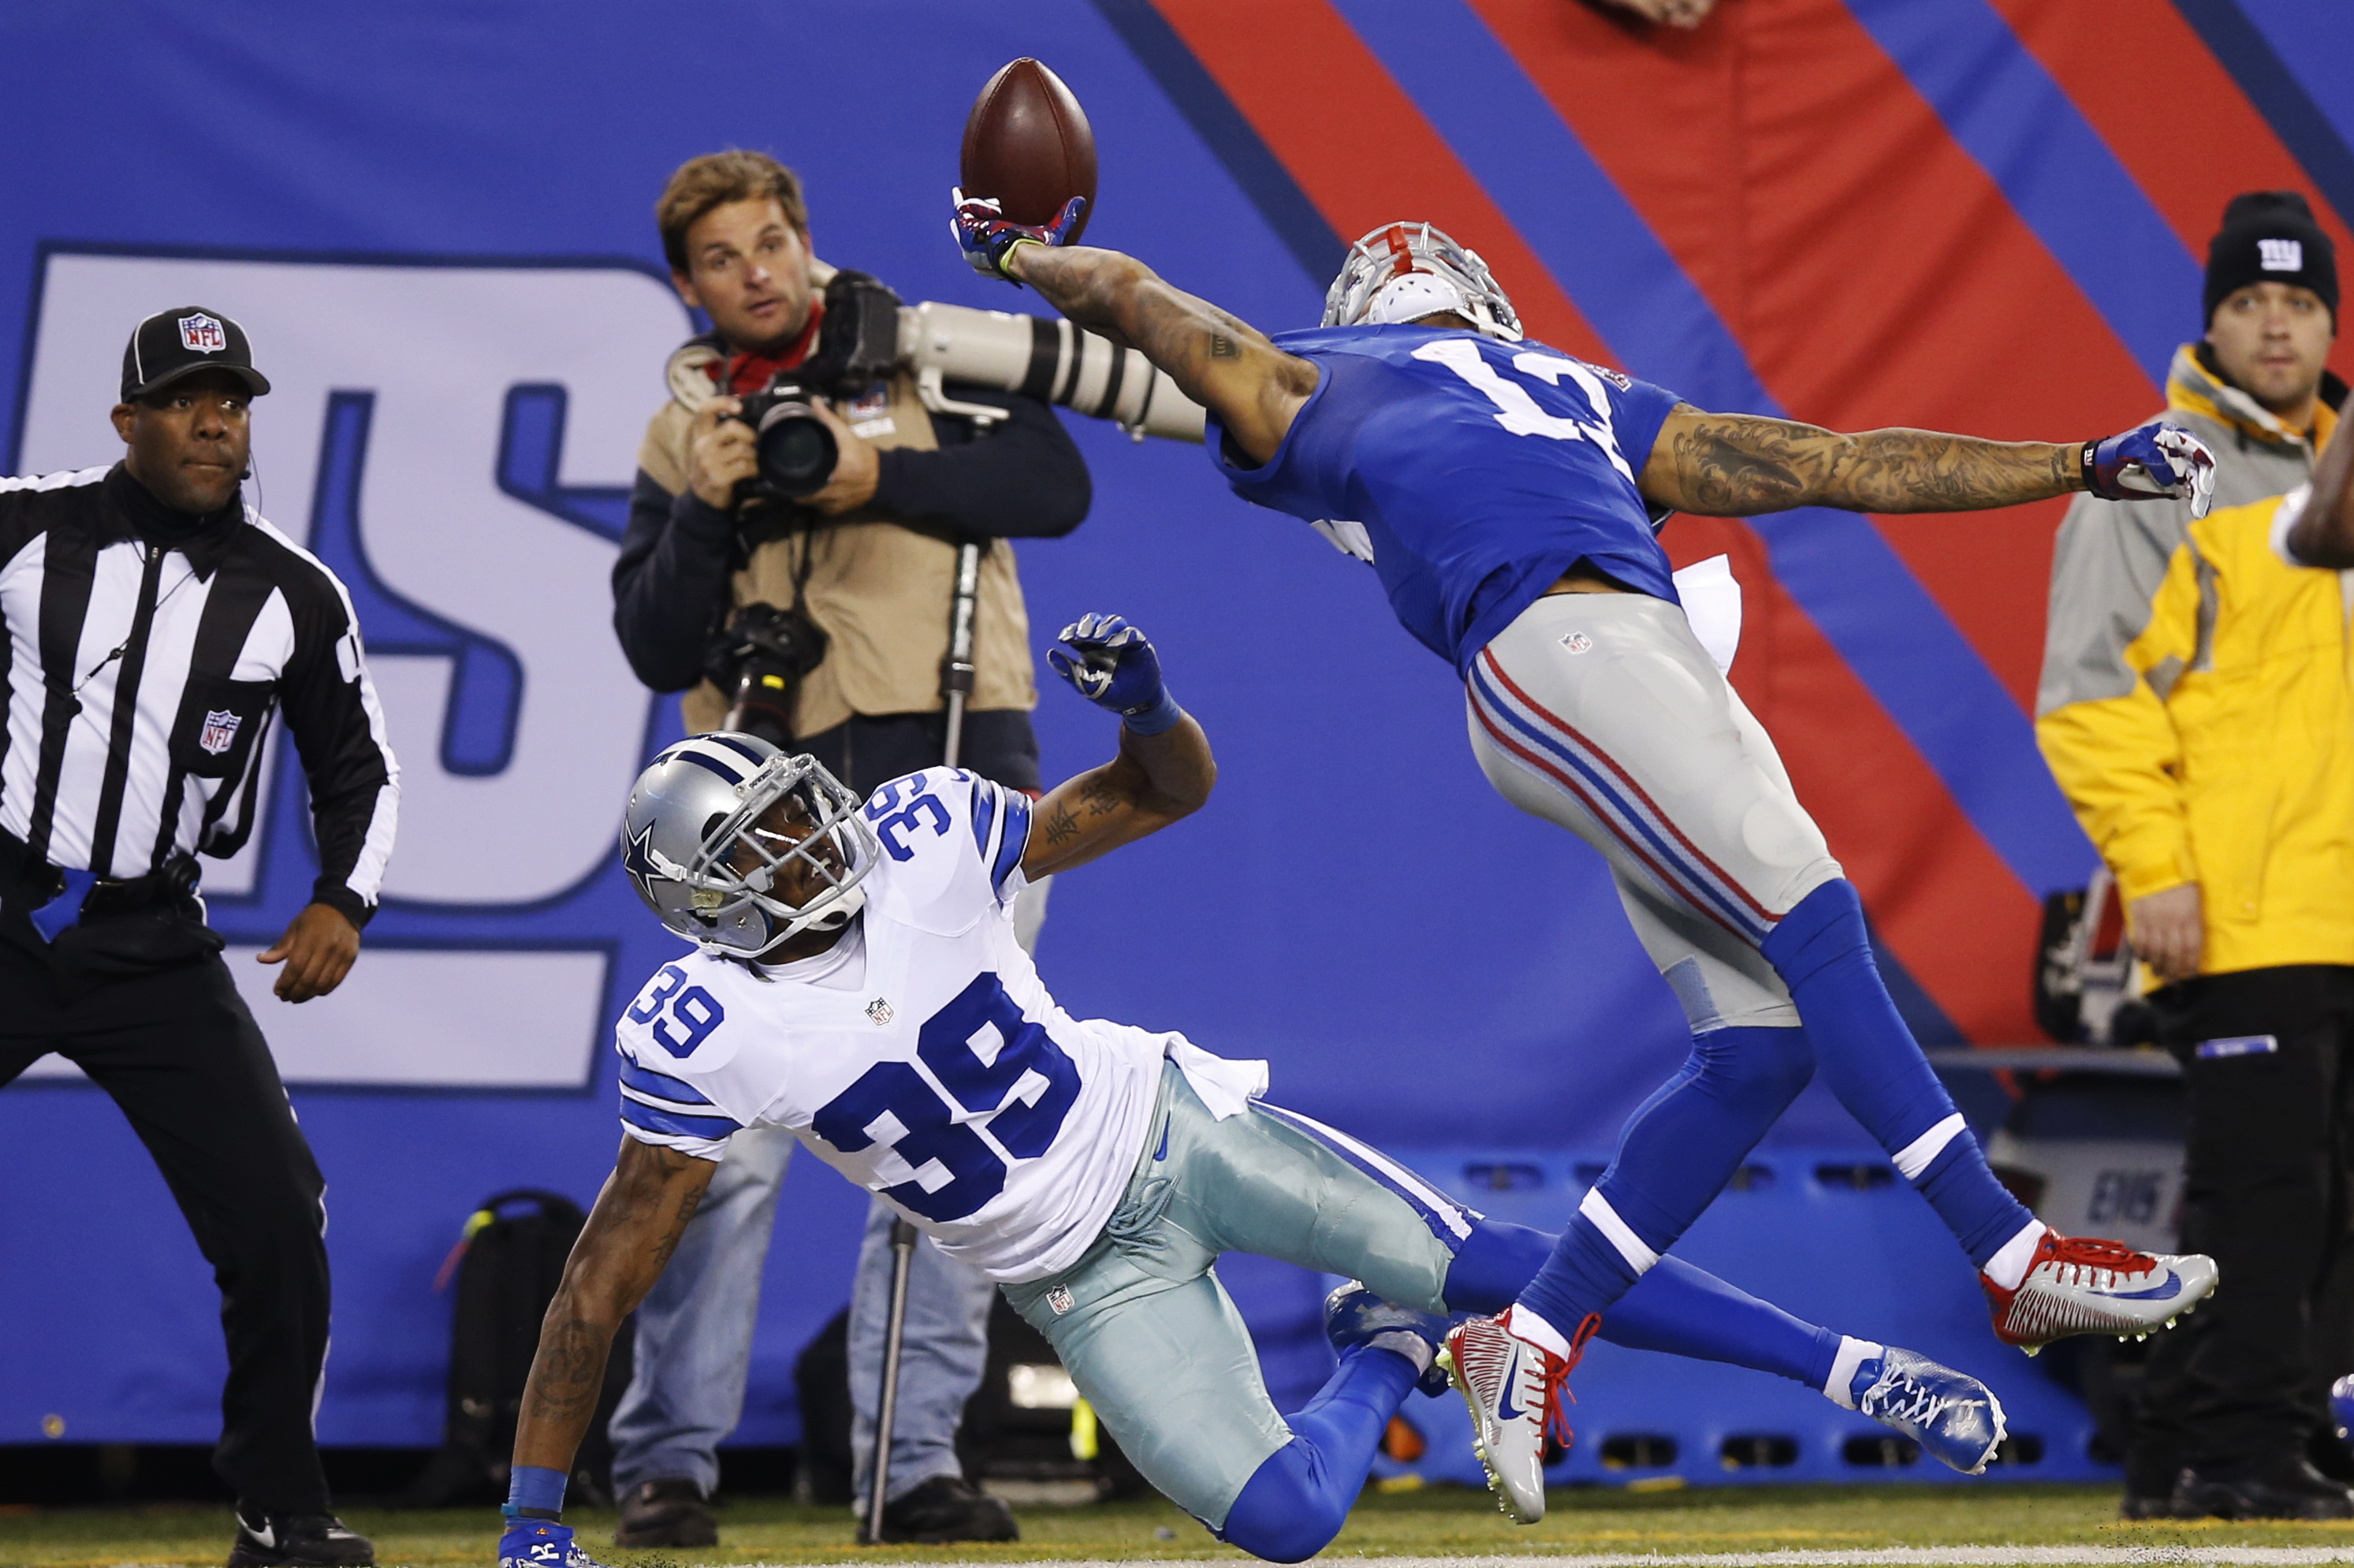 Odell Beckham Jr. says he feels like a rookie while preparing for